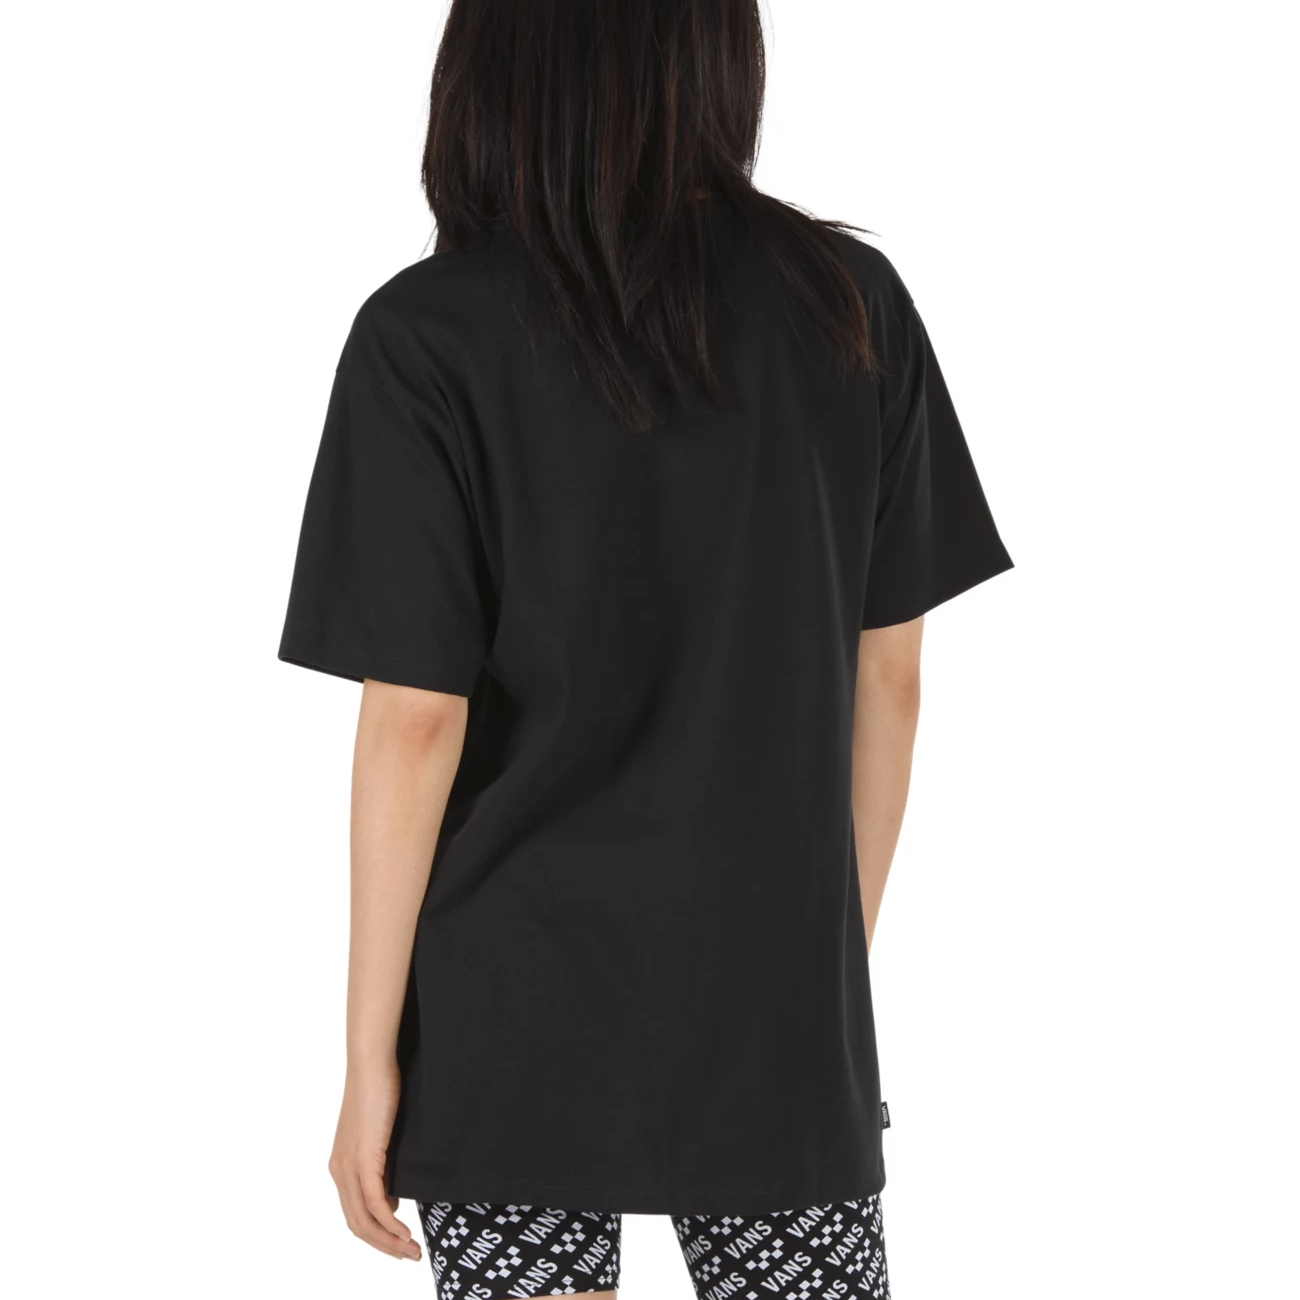 Off The Wall Classic T-shirt Black